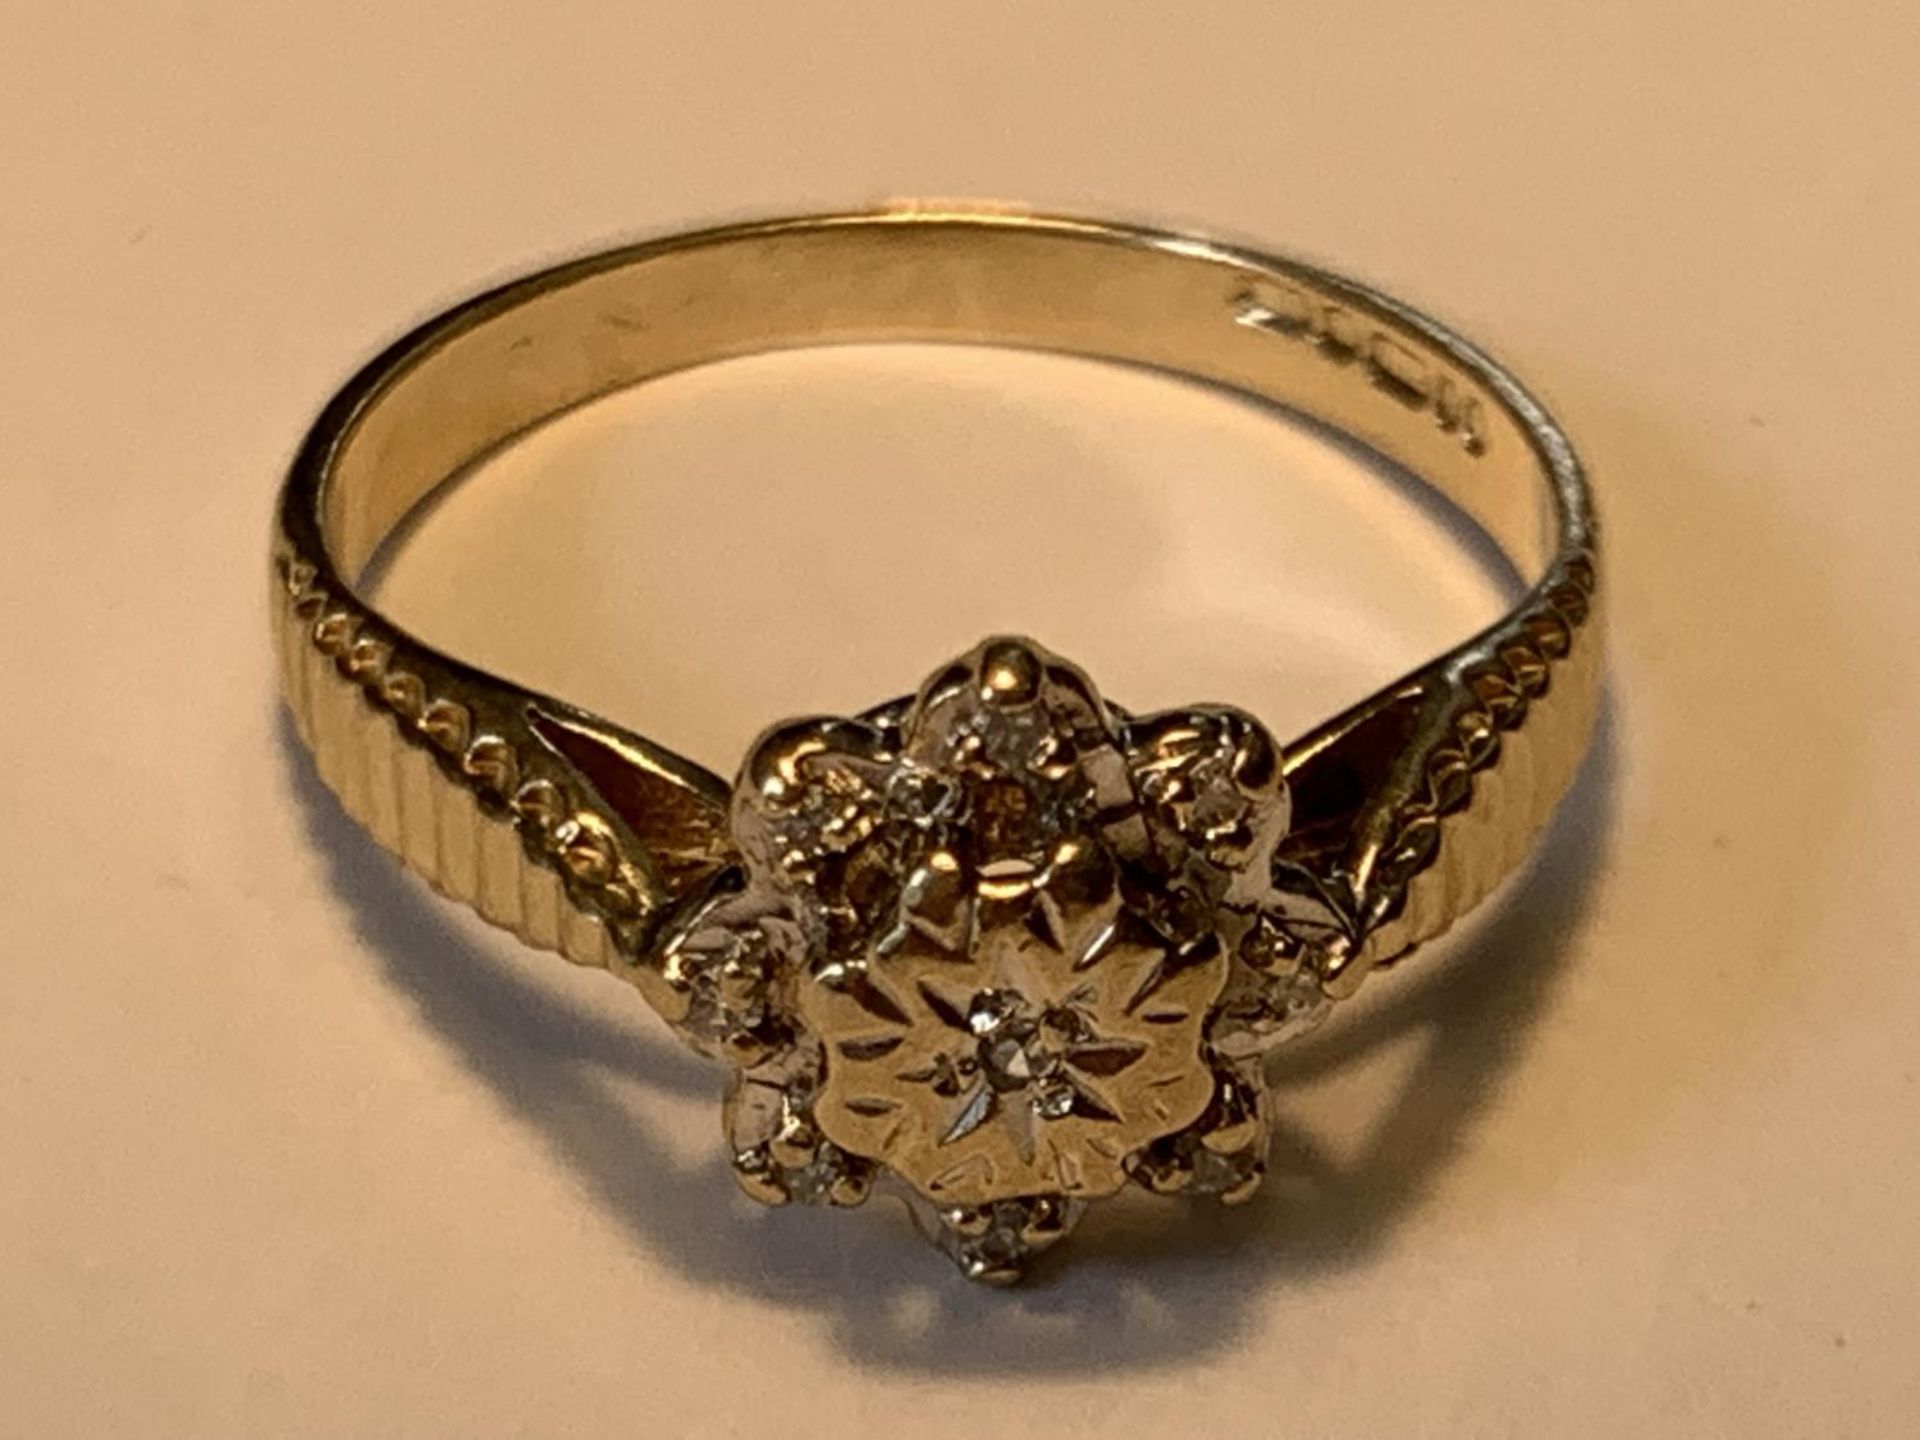 A 9 CARAT GOLD DIAMOND RING IN THE STYLE OF A DAISY SIZE K